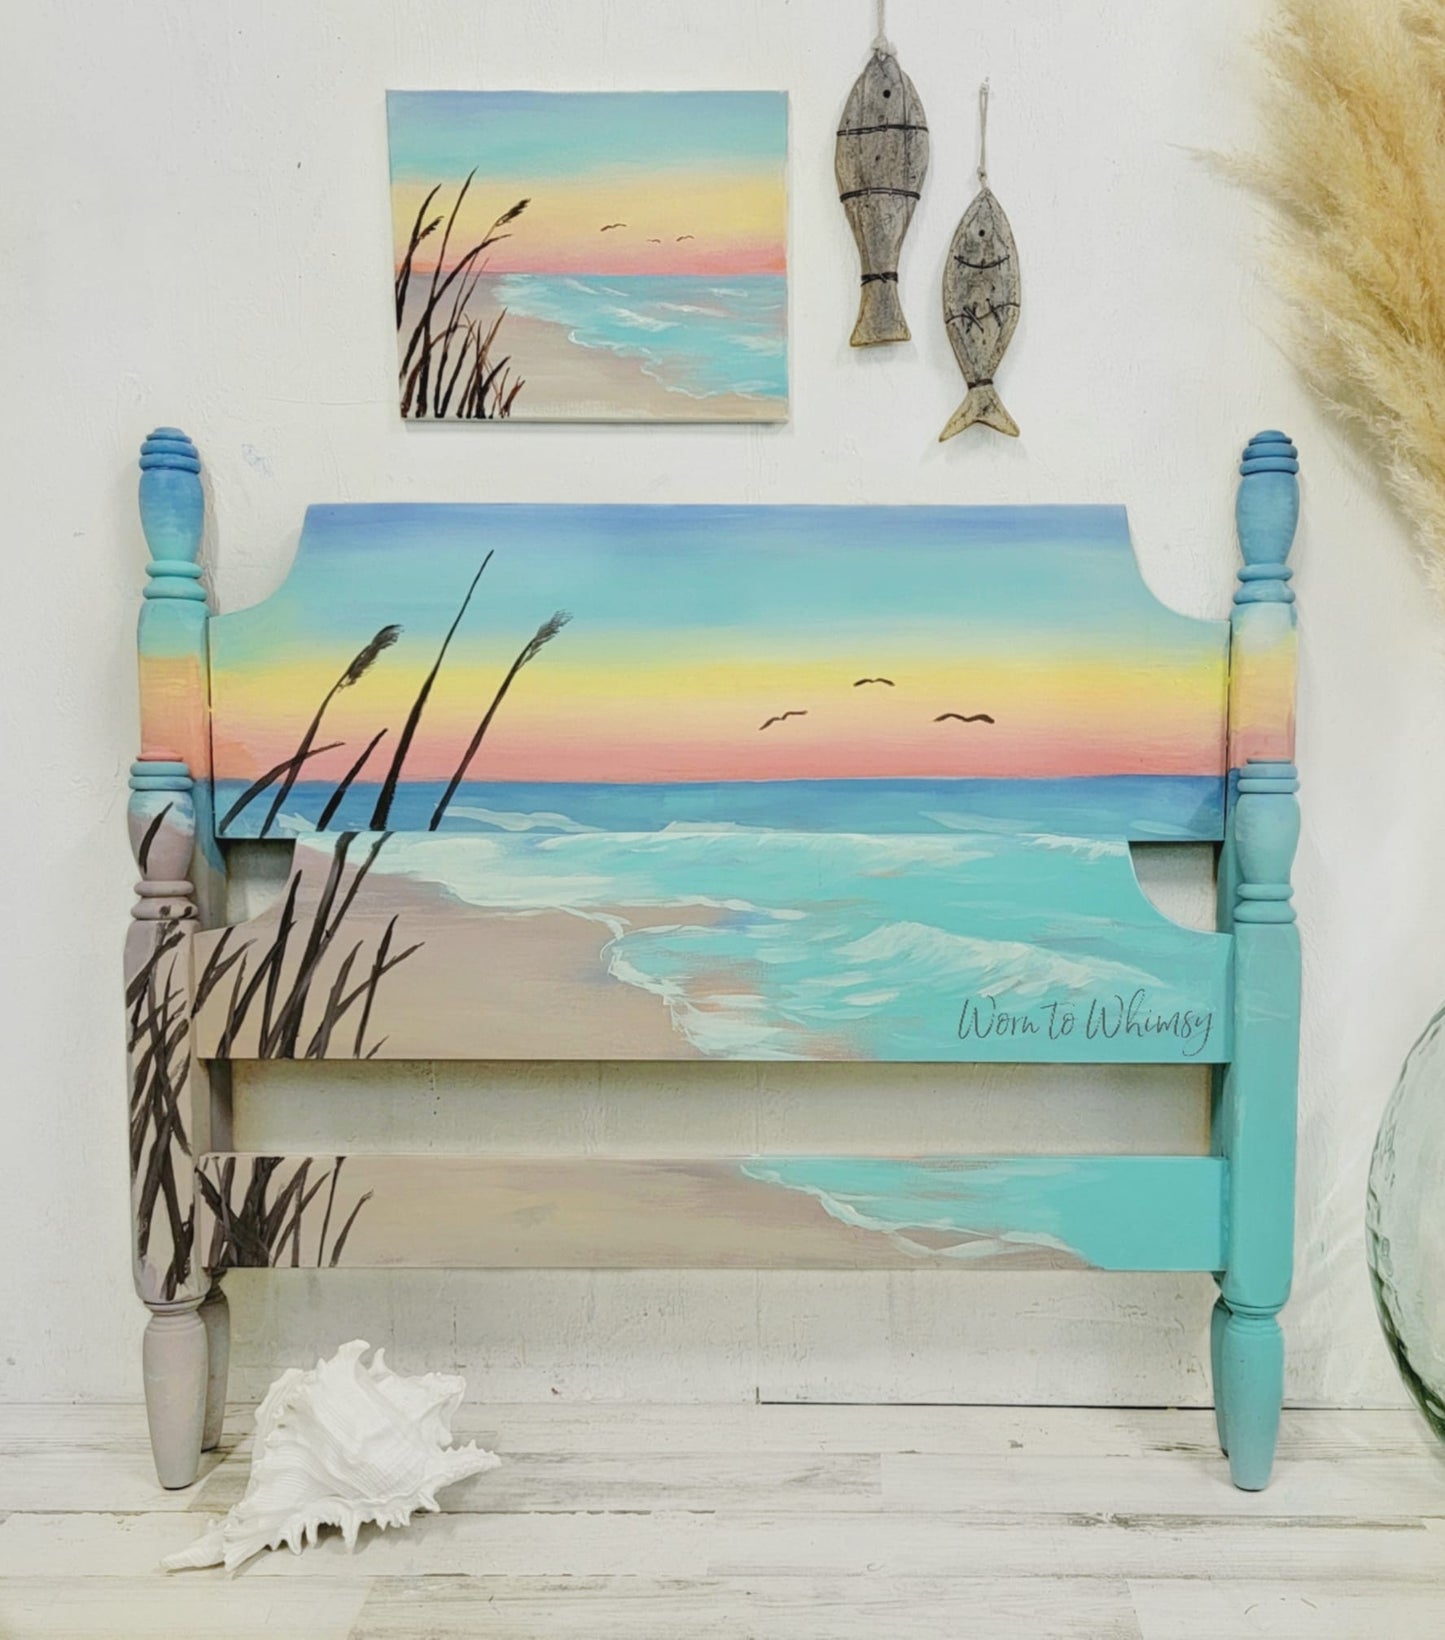 Daydream Apothecary Coastal Collection - Same Day Shipping - Clay And Chalk Paint - Worn to Whimsy - DIY Furniture Upcycle